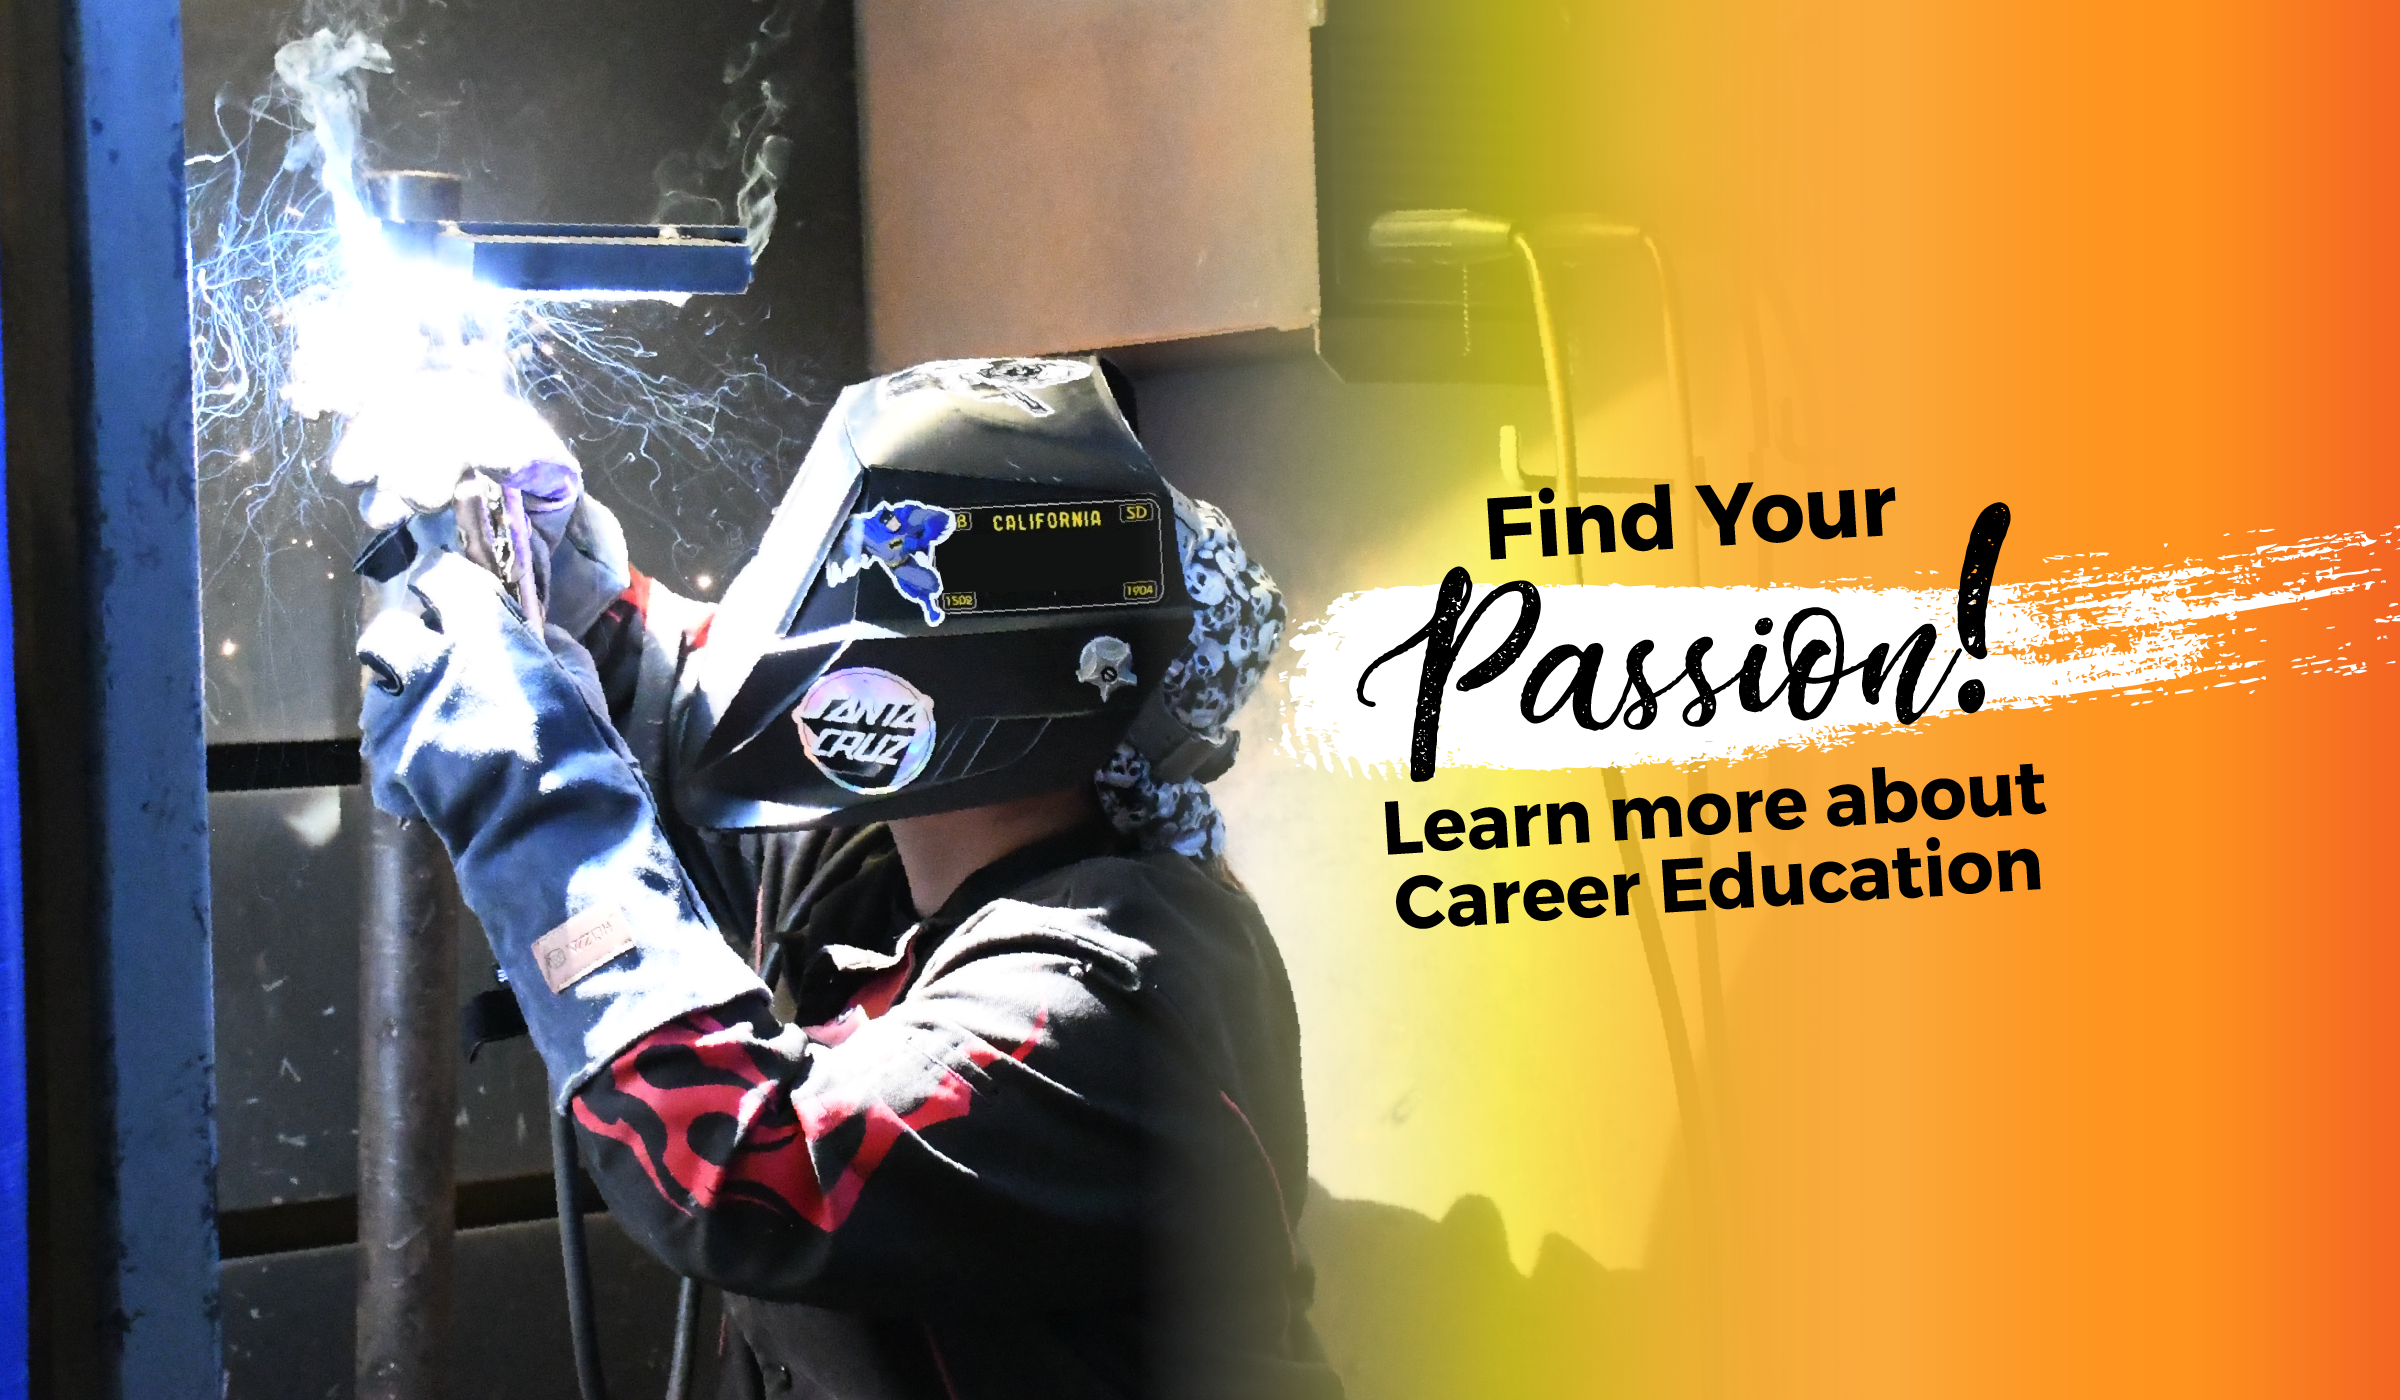 find your passion. learn more about career education with photo of welder